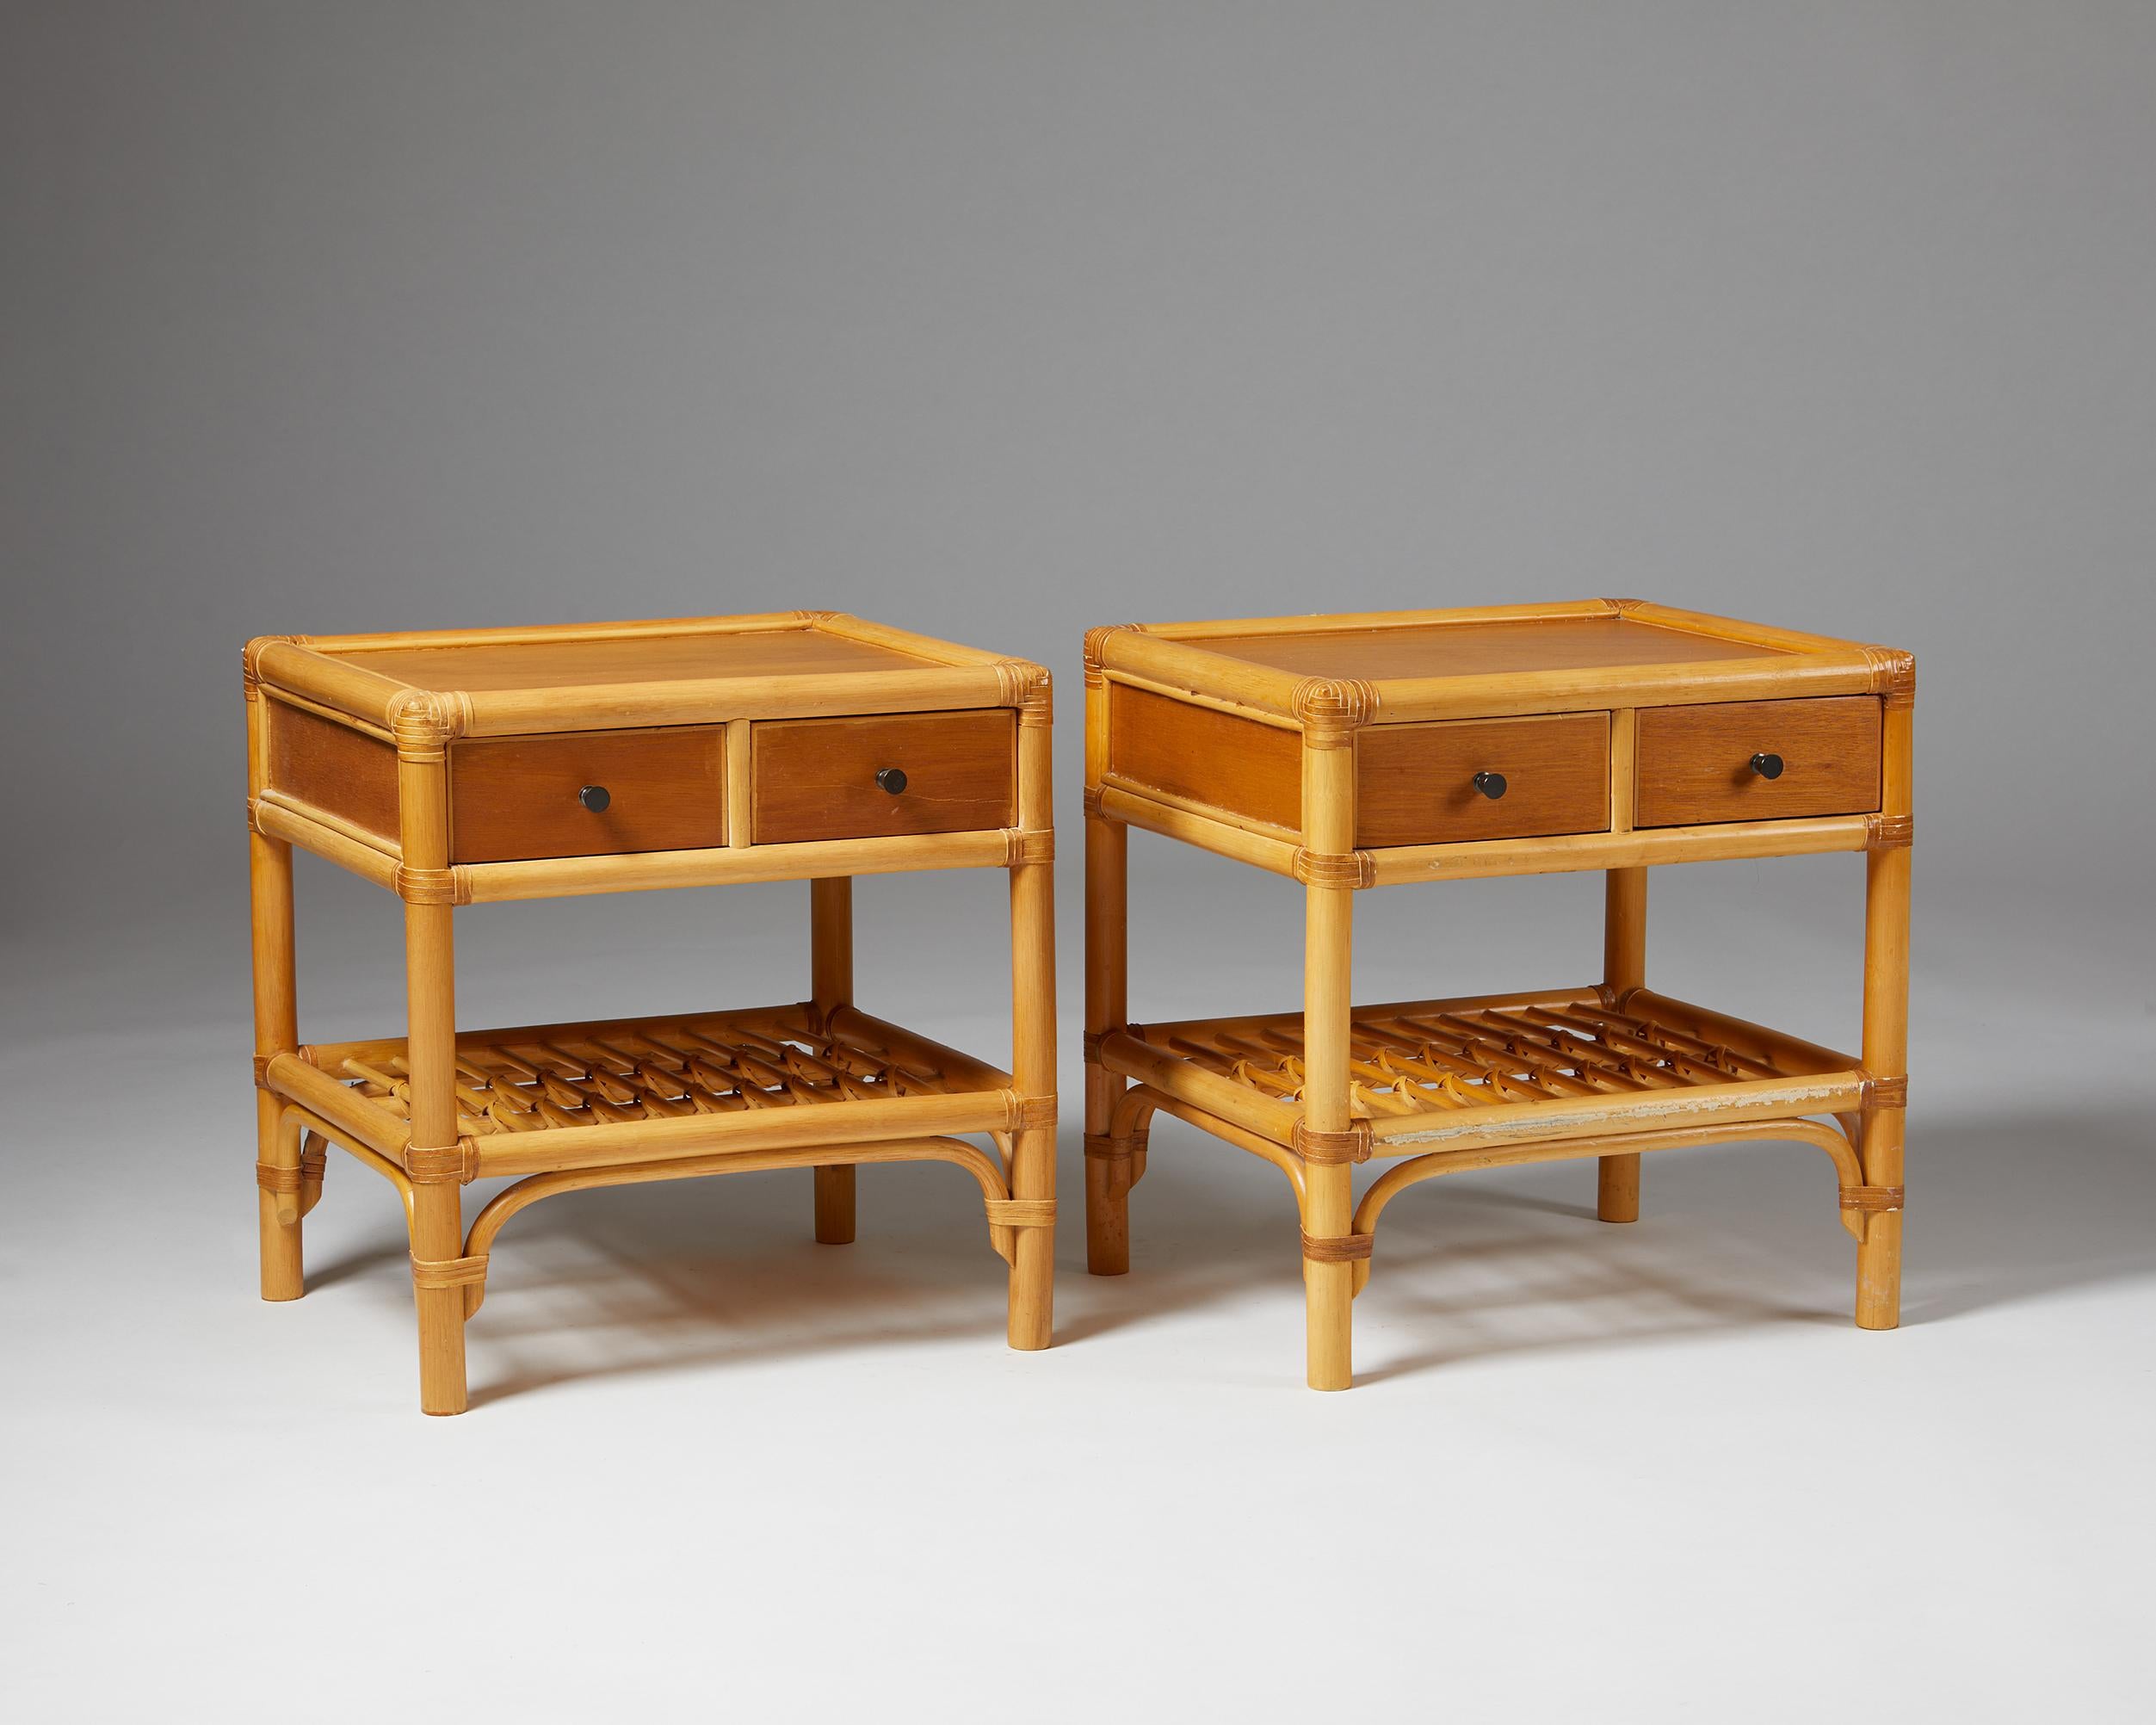 Pair of bedside tables, anonymous for DUX,
Sweden. 1960s.

Cane, rattan and teak.

The colonial-style combination of cane, rattan, and teak makes this Scandinavian bedside table design particularly interesting. The woven edges and metal handles